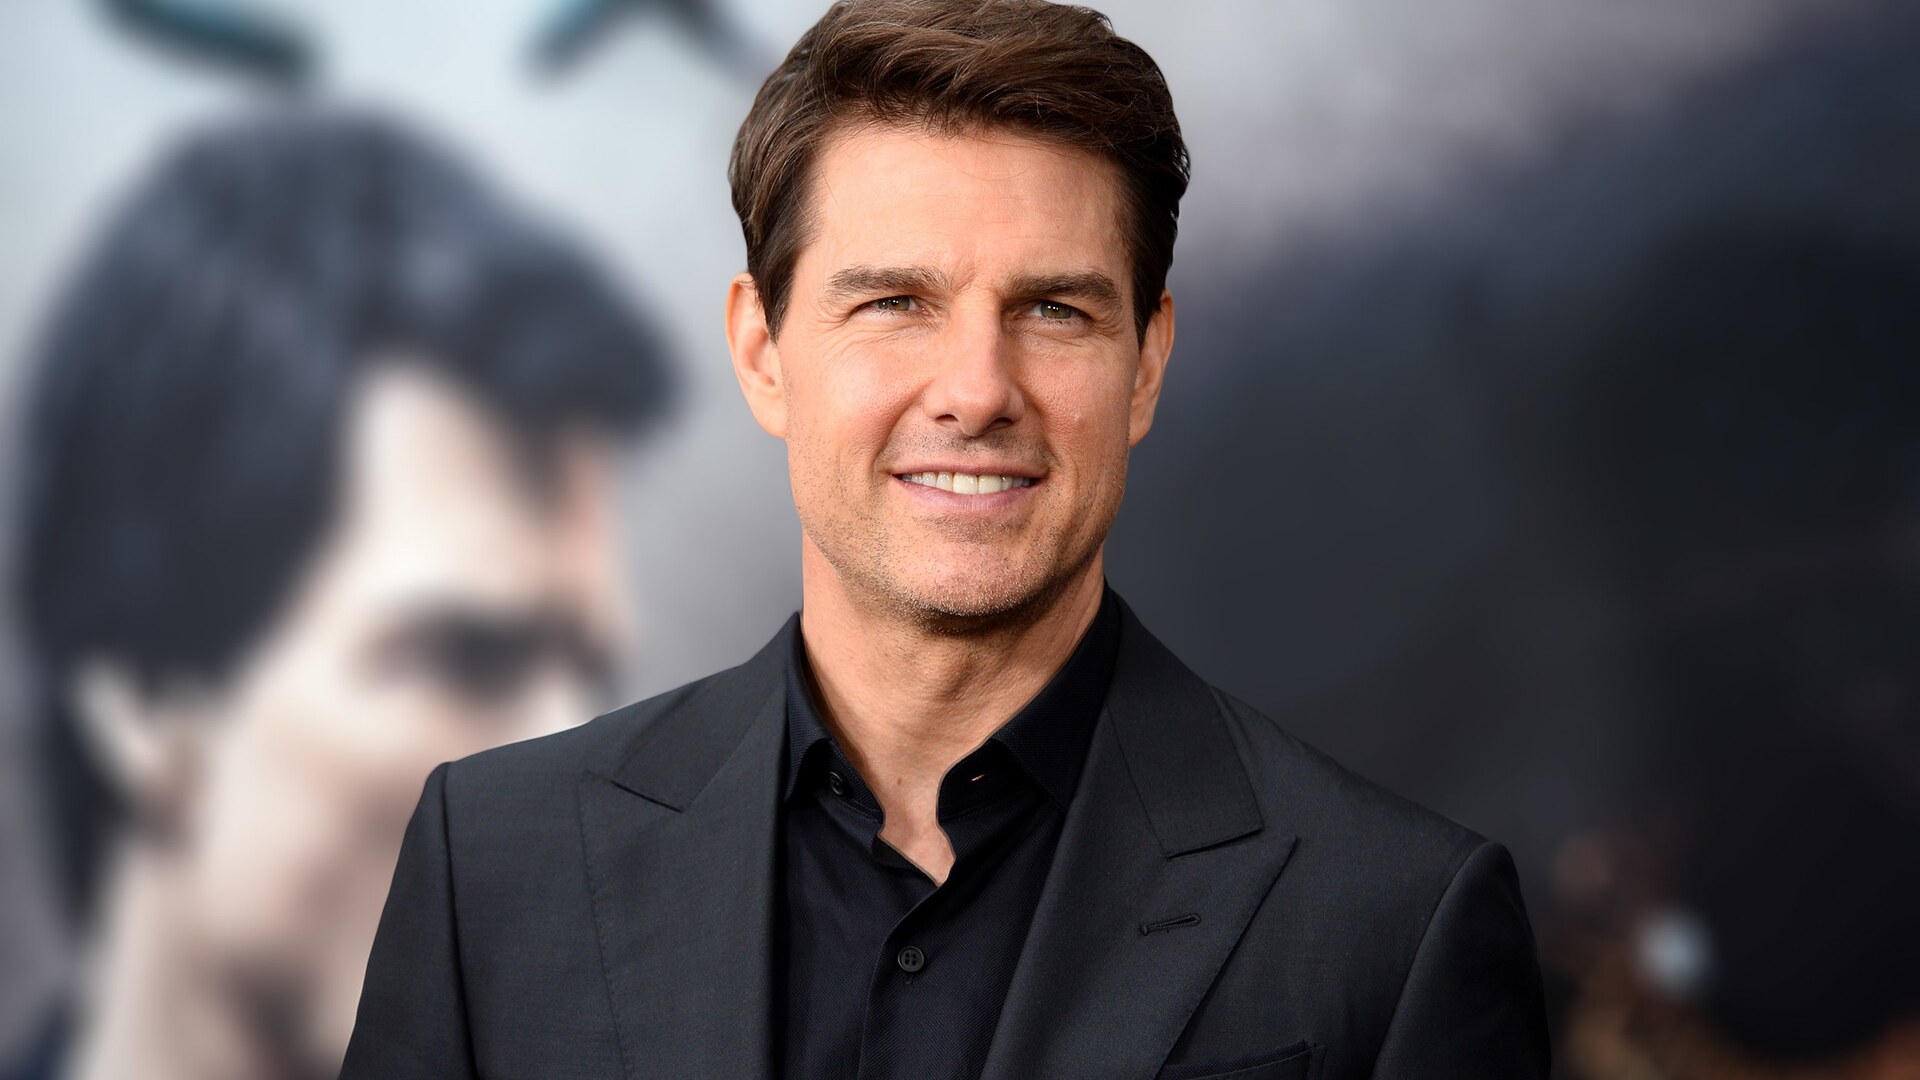 tom cruise hd images download